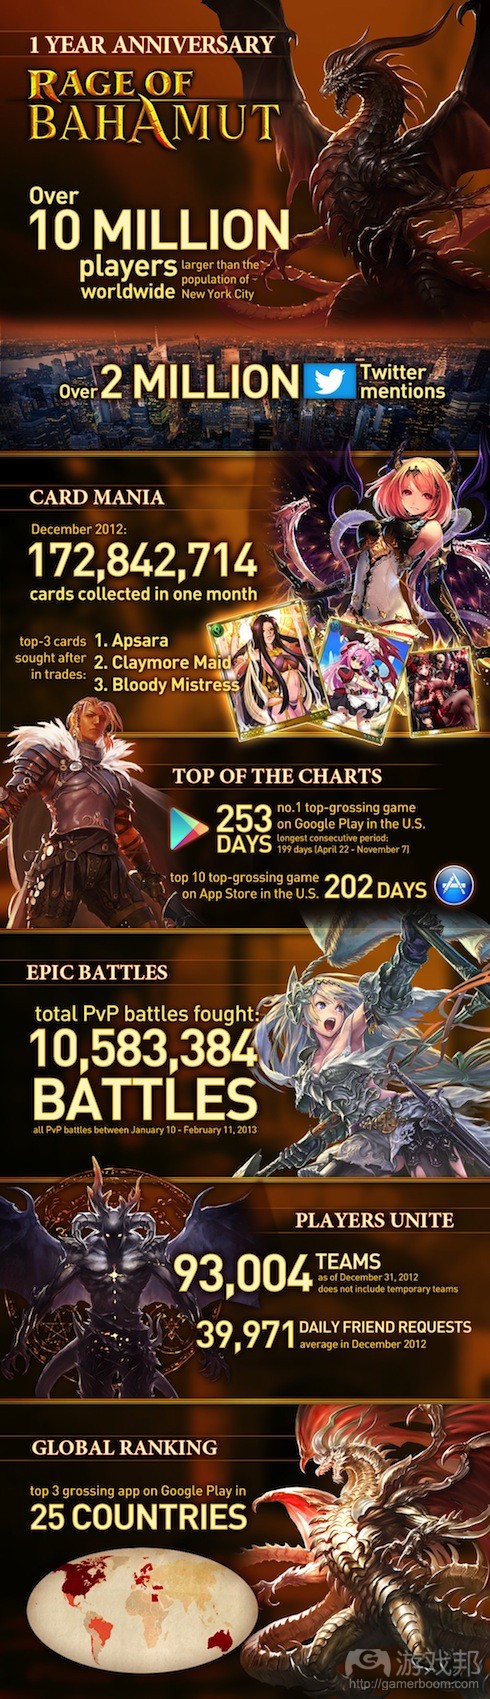 rage-of-bahamut infographic(from games)